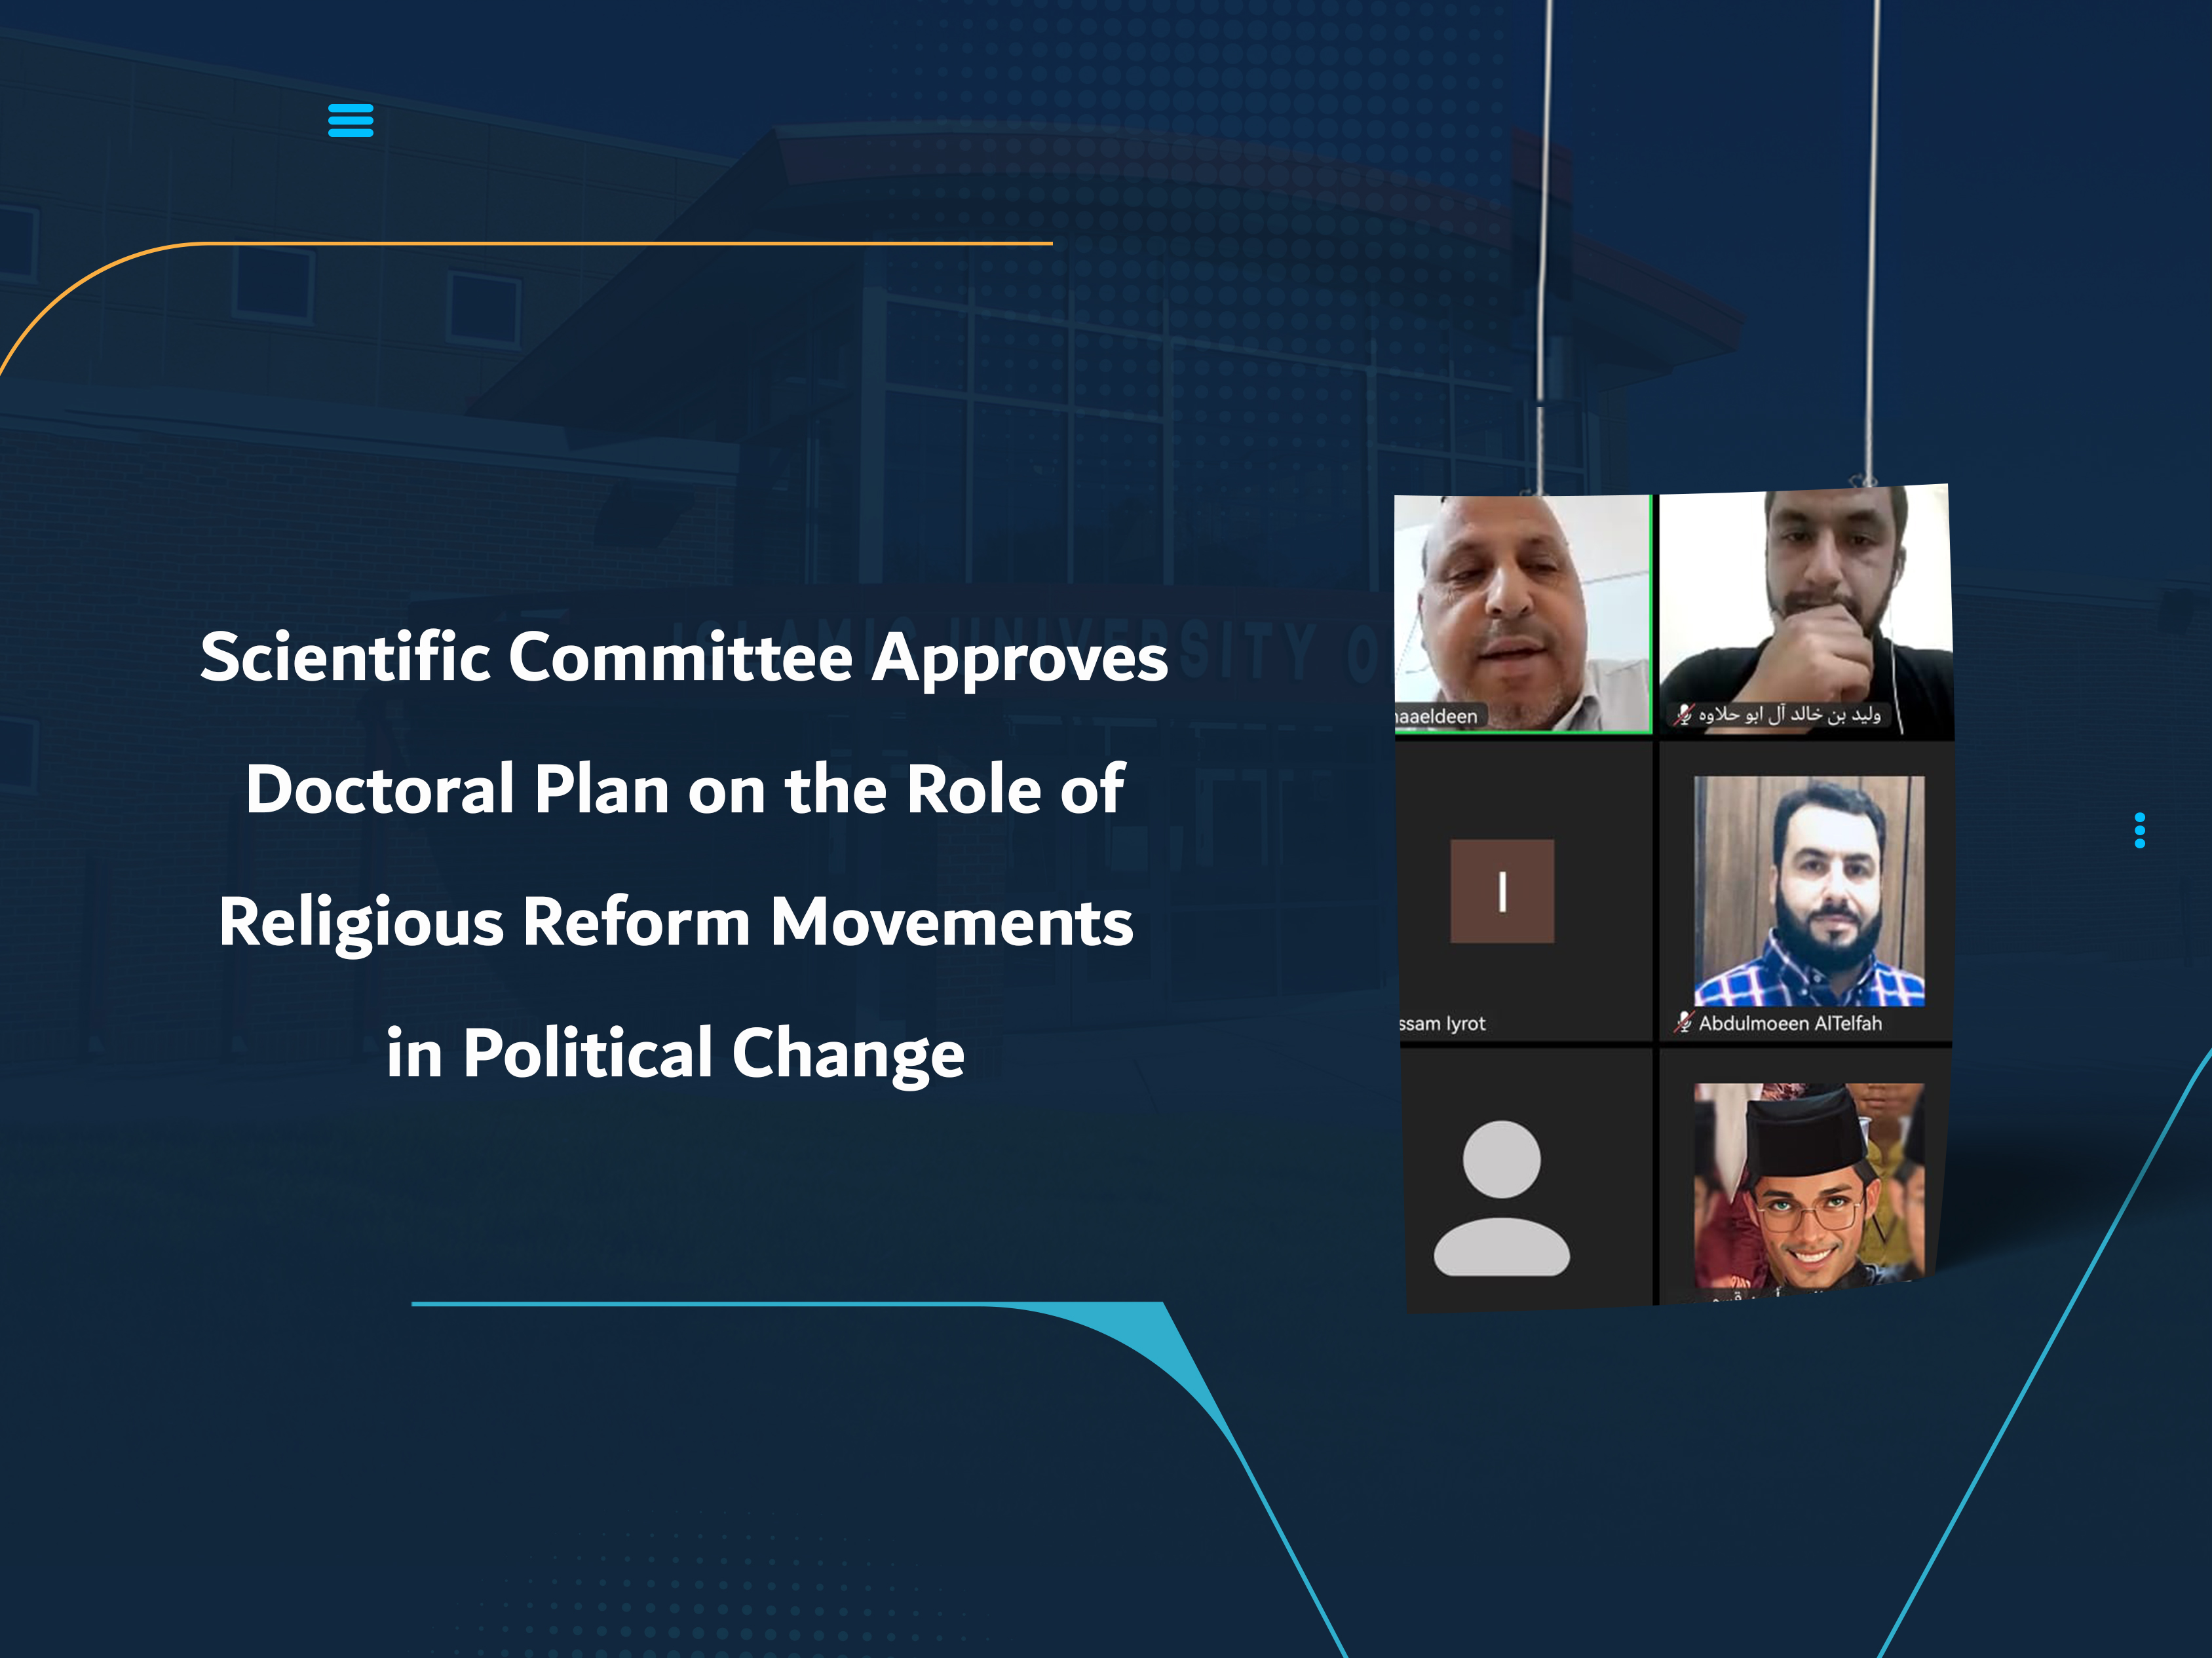 Scientific Committee Approves Doctoral Plan on the Role of Religious Reform Movements in Political Change